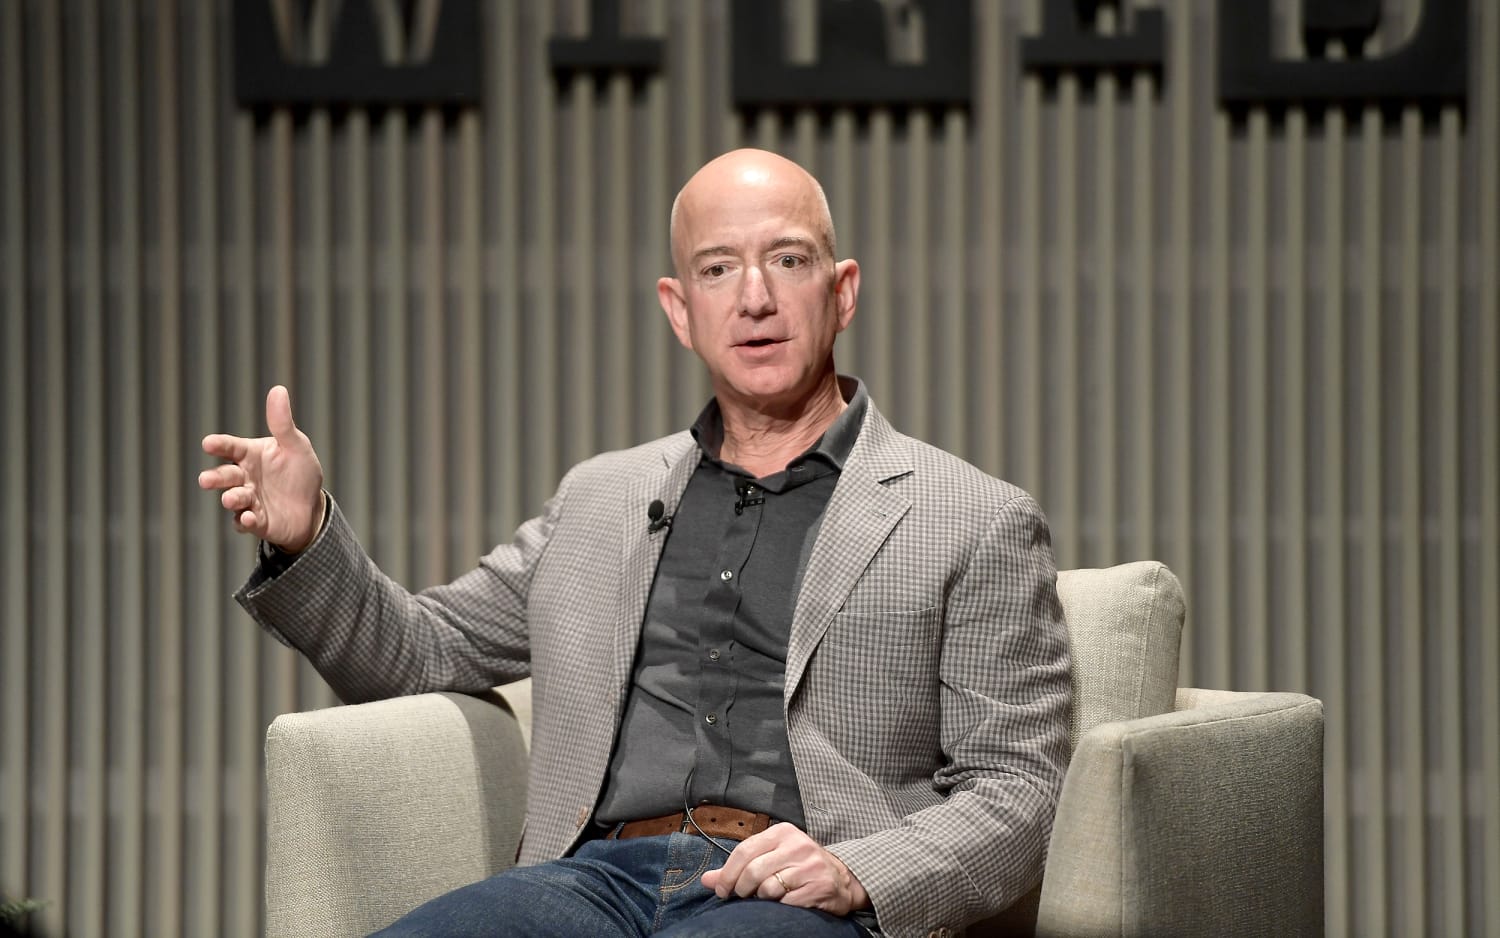 Jeff Bezos Photos Show That No One S Intimate Selfies Are Safe And That They Aren T A Big Deal